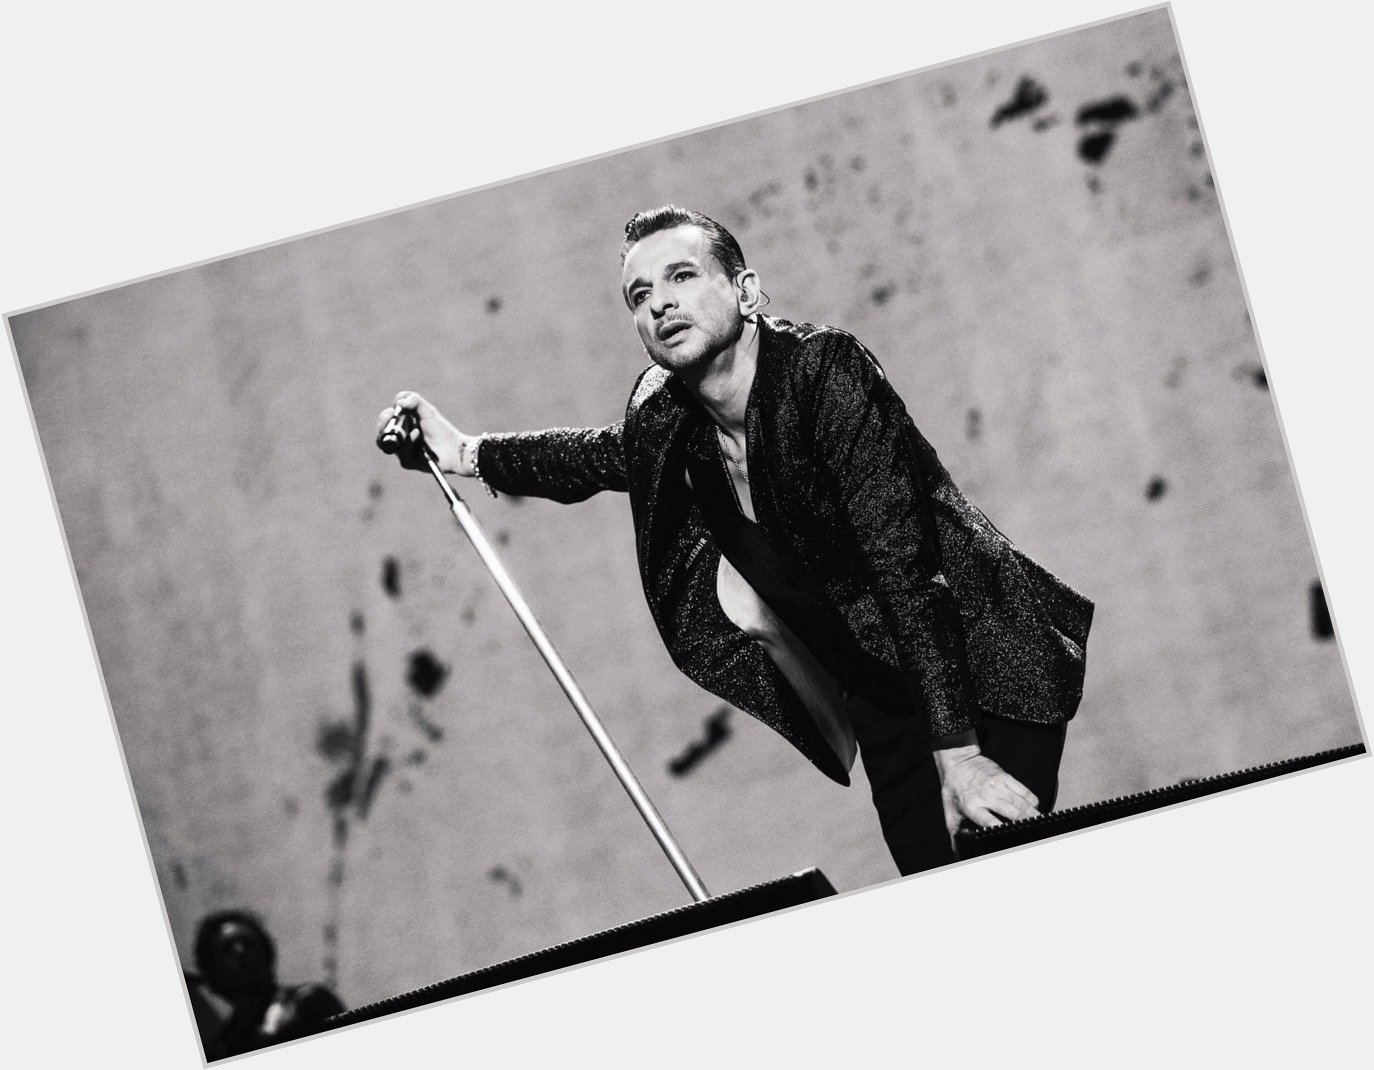 Happy birthday to Dave Gahan!  Incredible voice
Talented man
Legend 